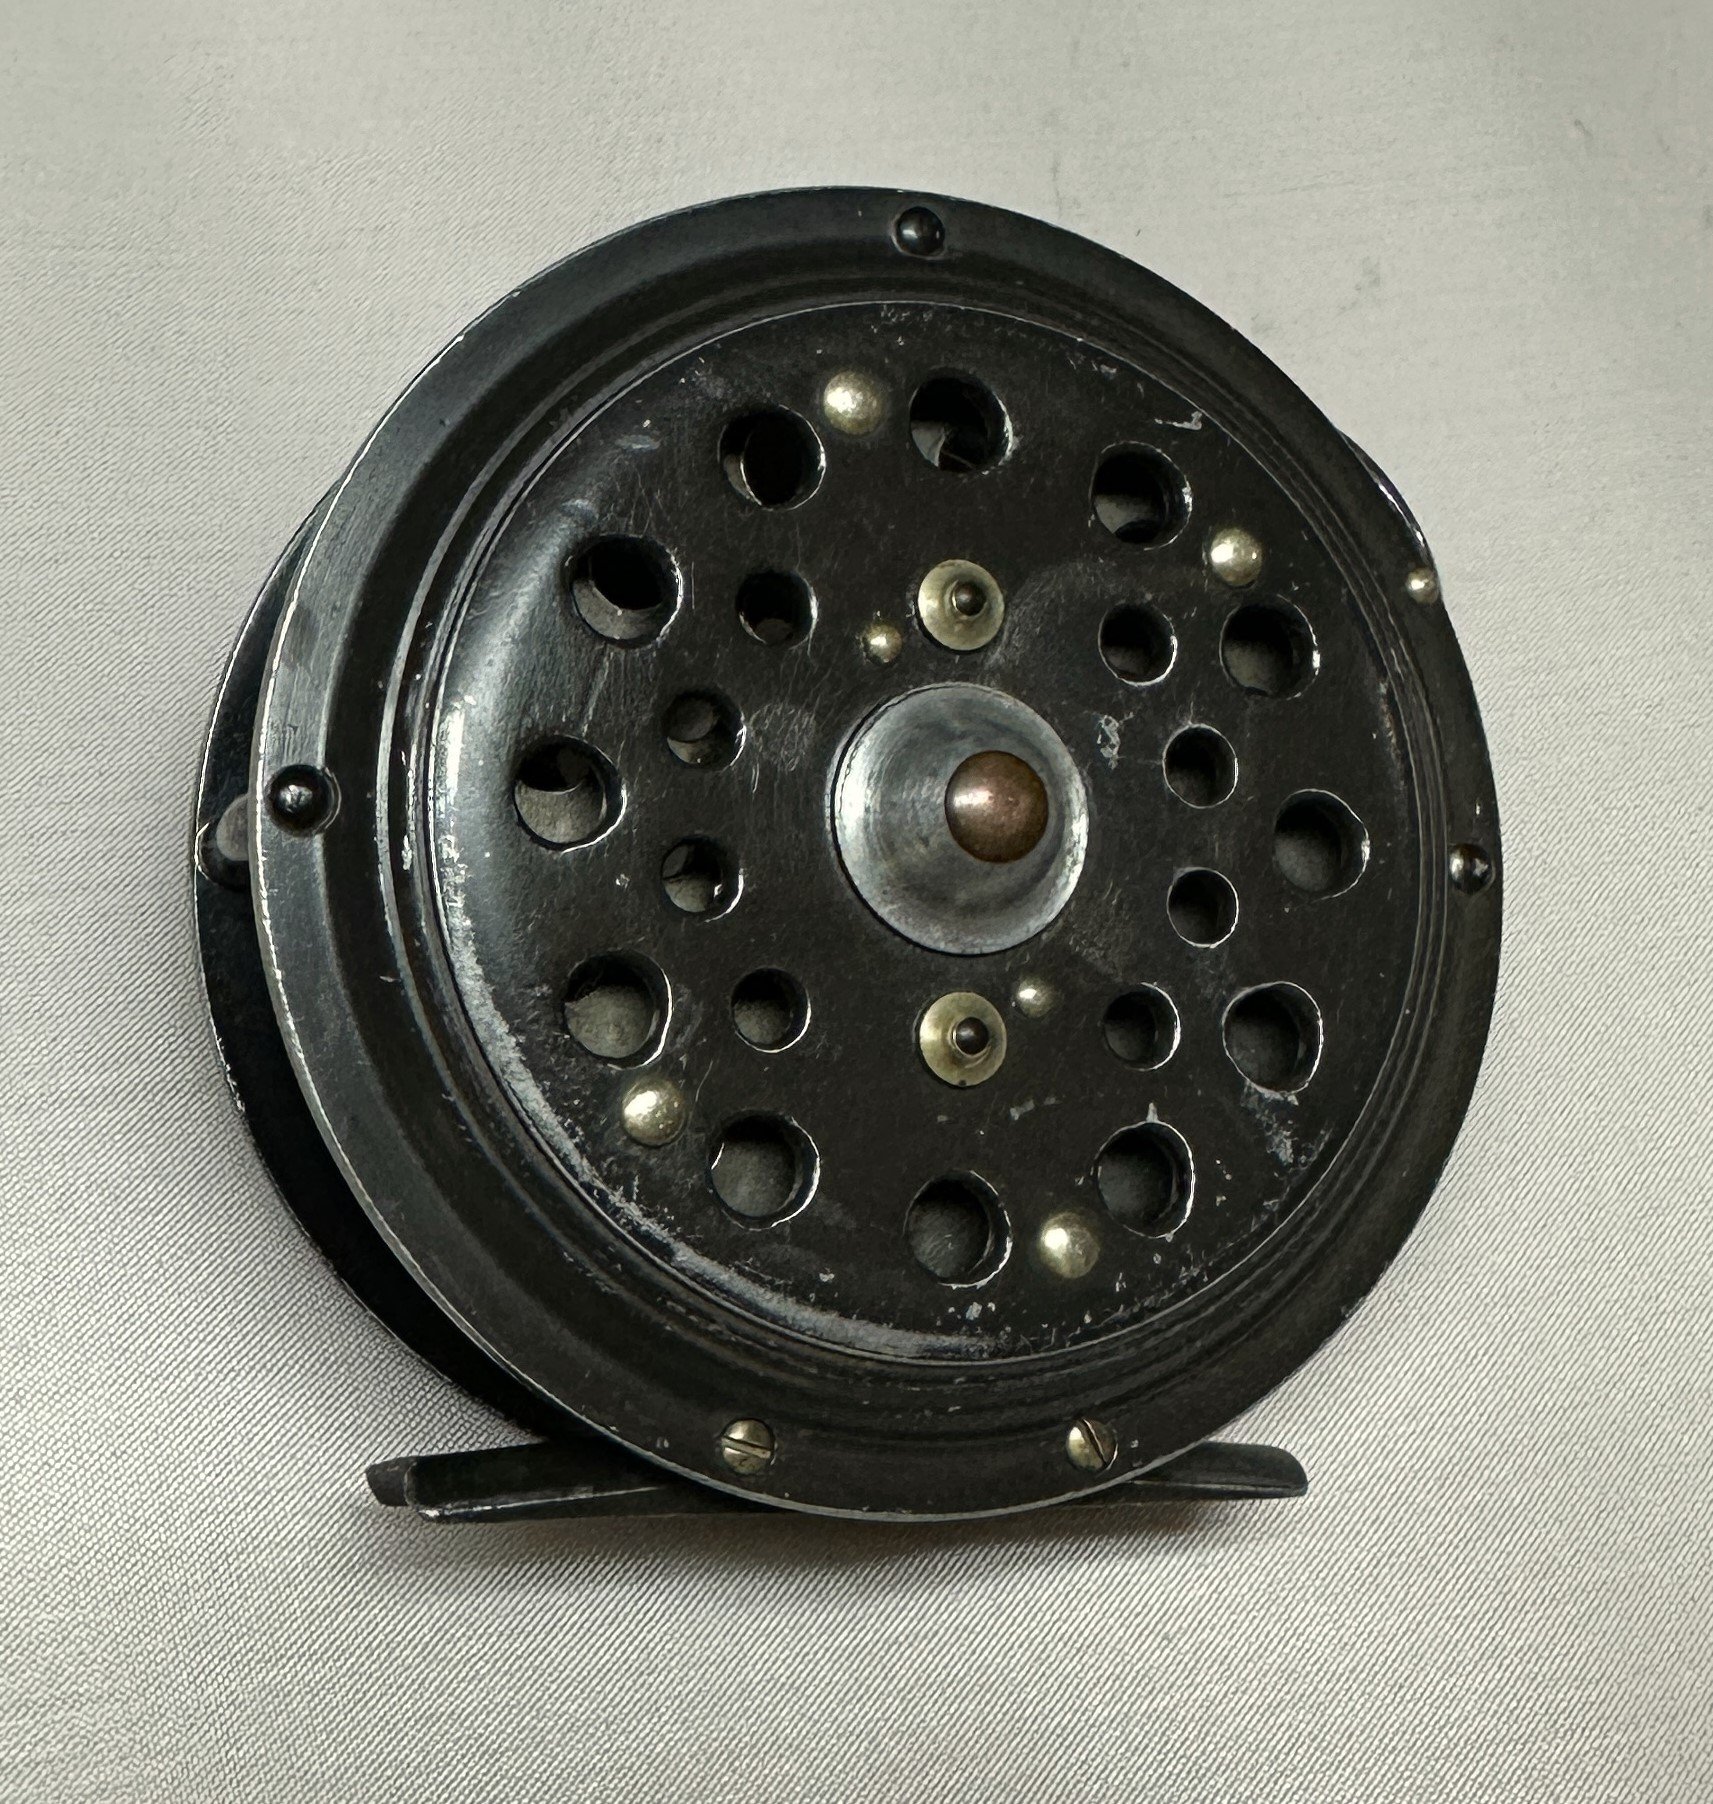 PFLUEGER MEDALIST FLY reel 1595 1/2 RC Excellent Condition Lightly Used  $35.00 - PicClick